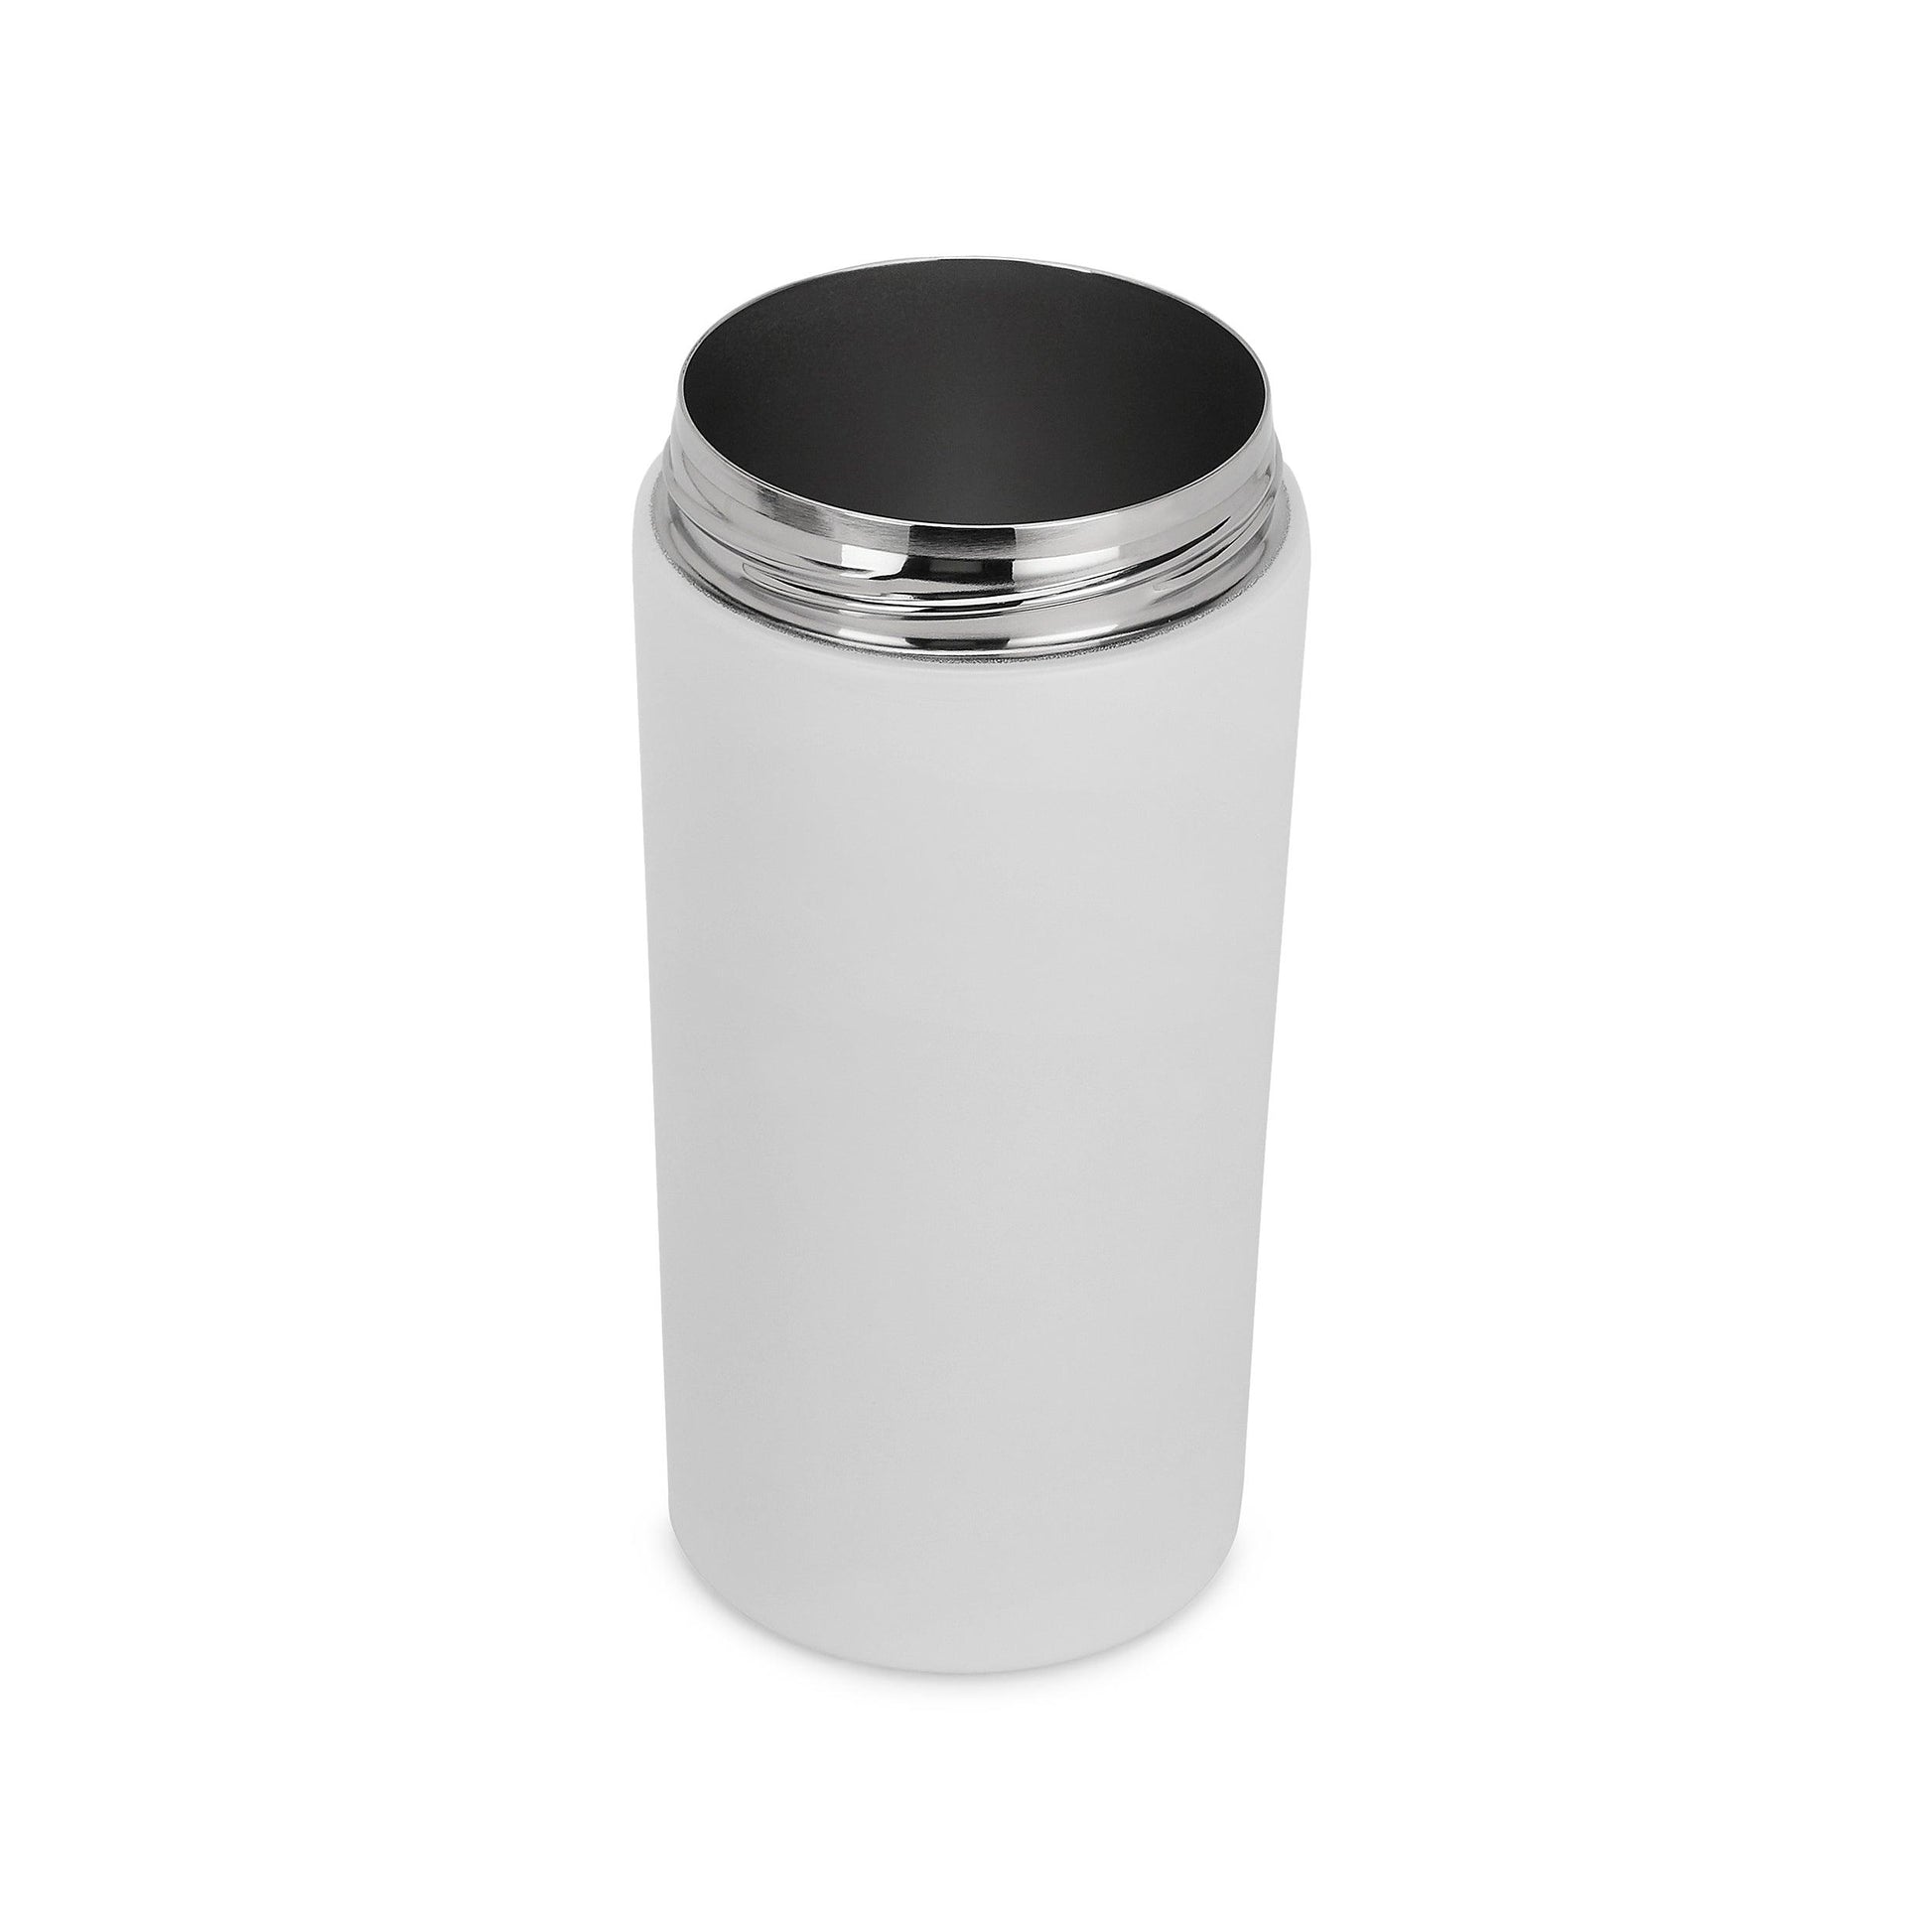 Doctor gift stainless steel tumbler/koozie combo In the house